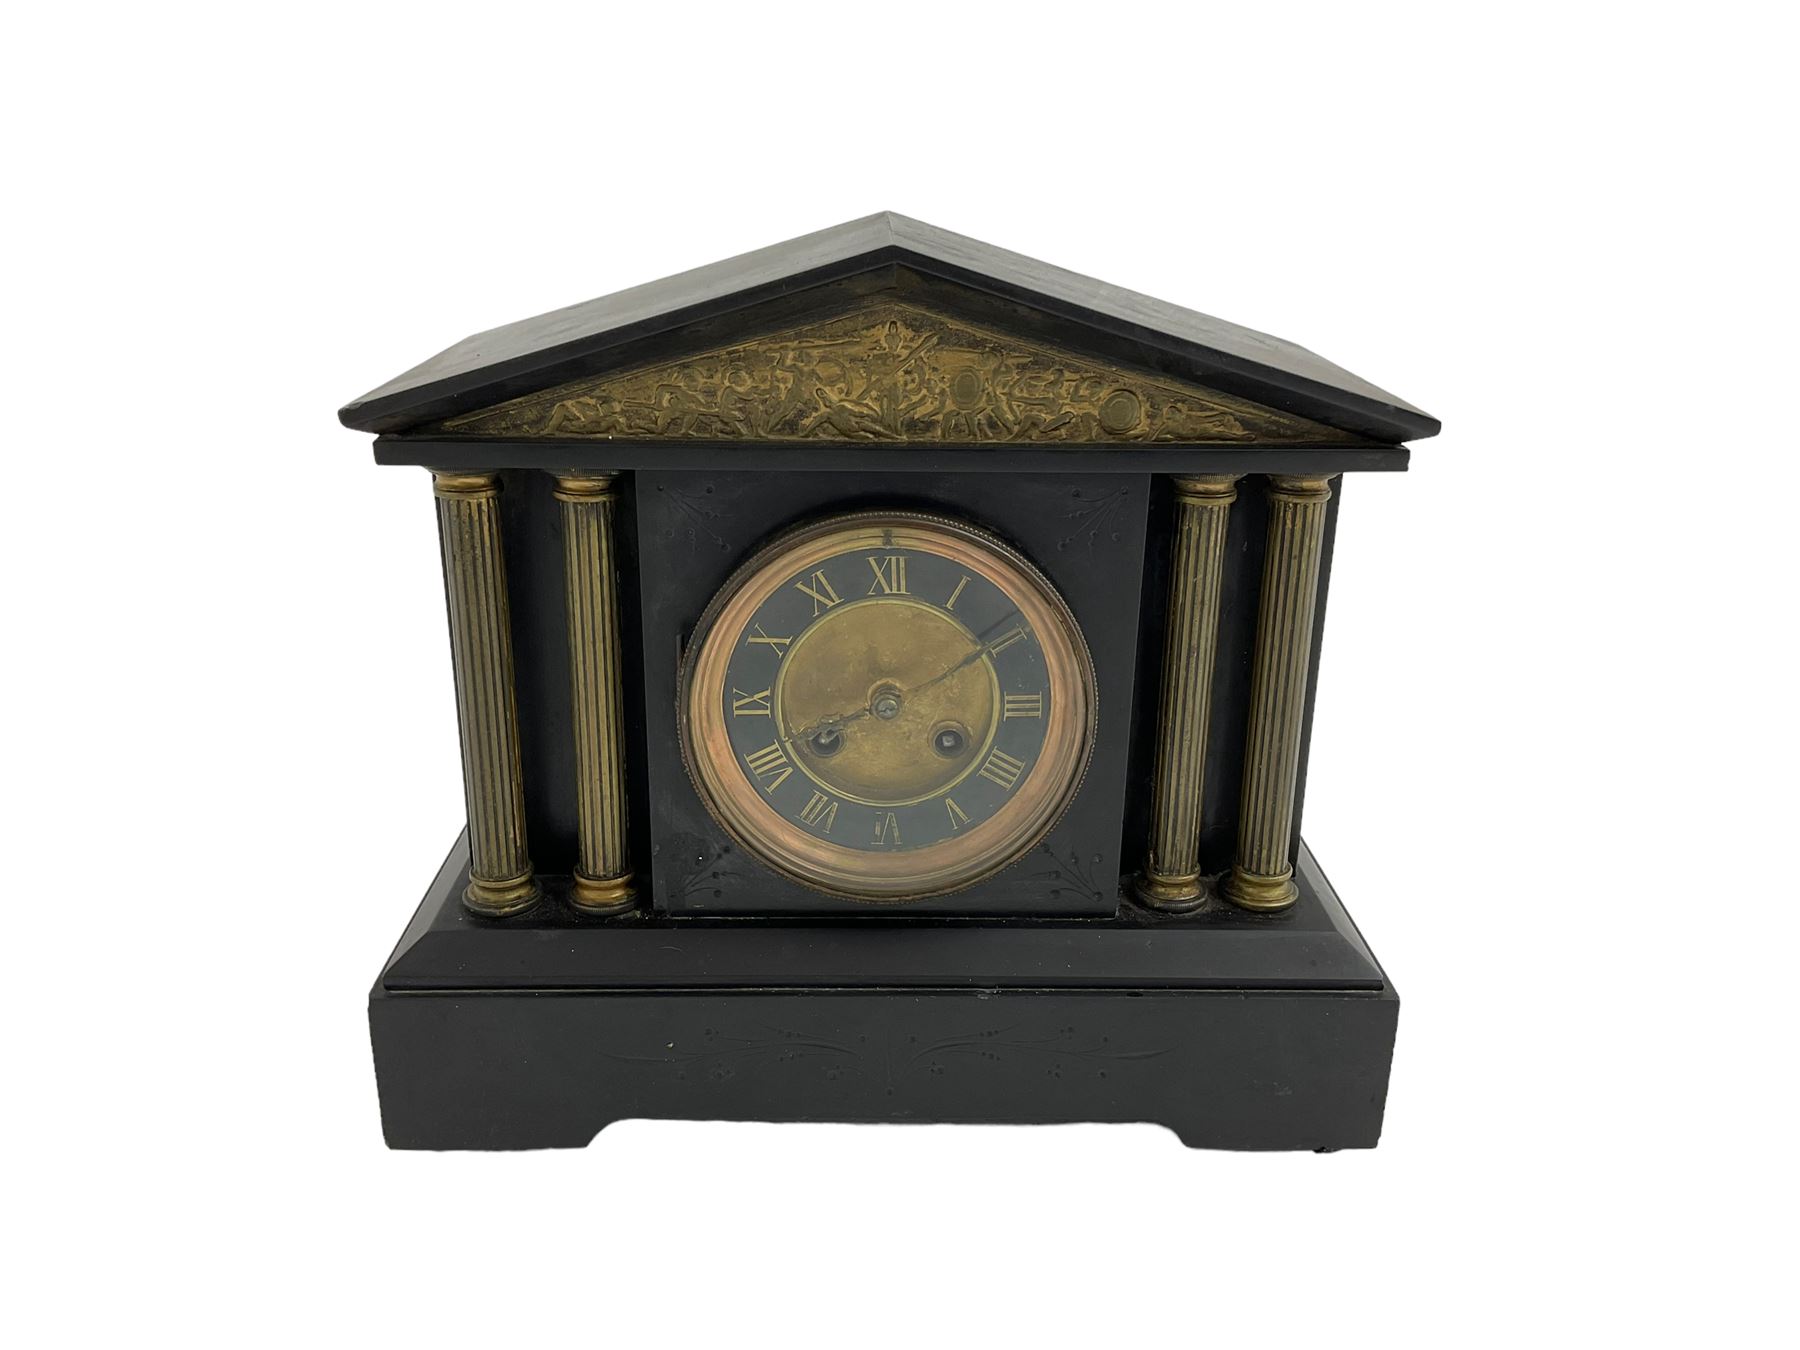 French slate mantle clock striking on a gong.